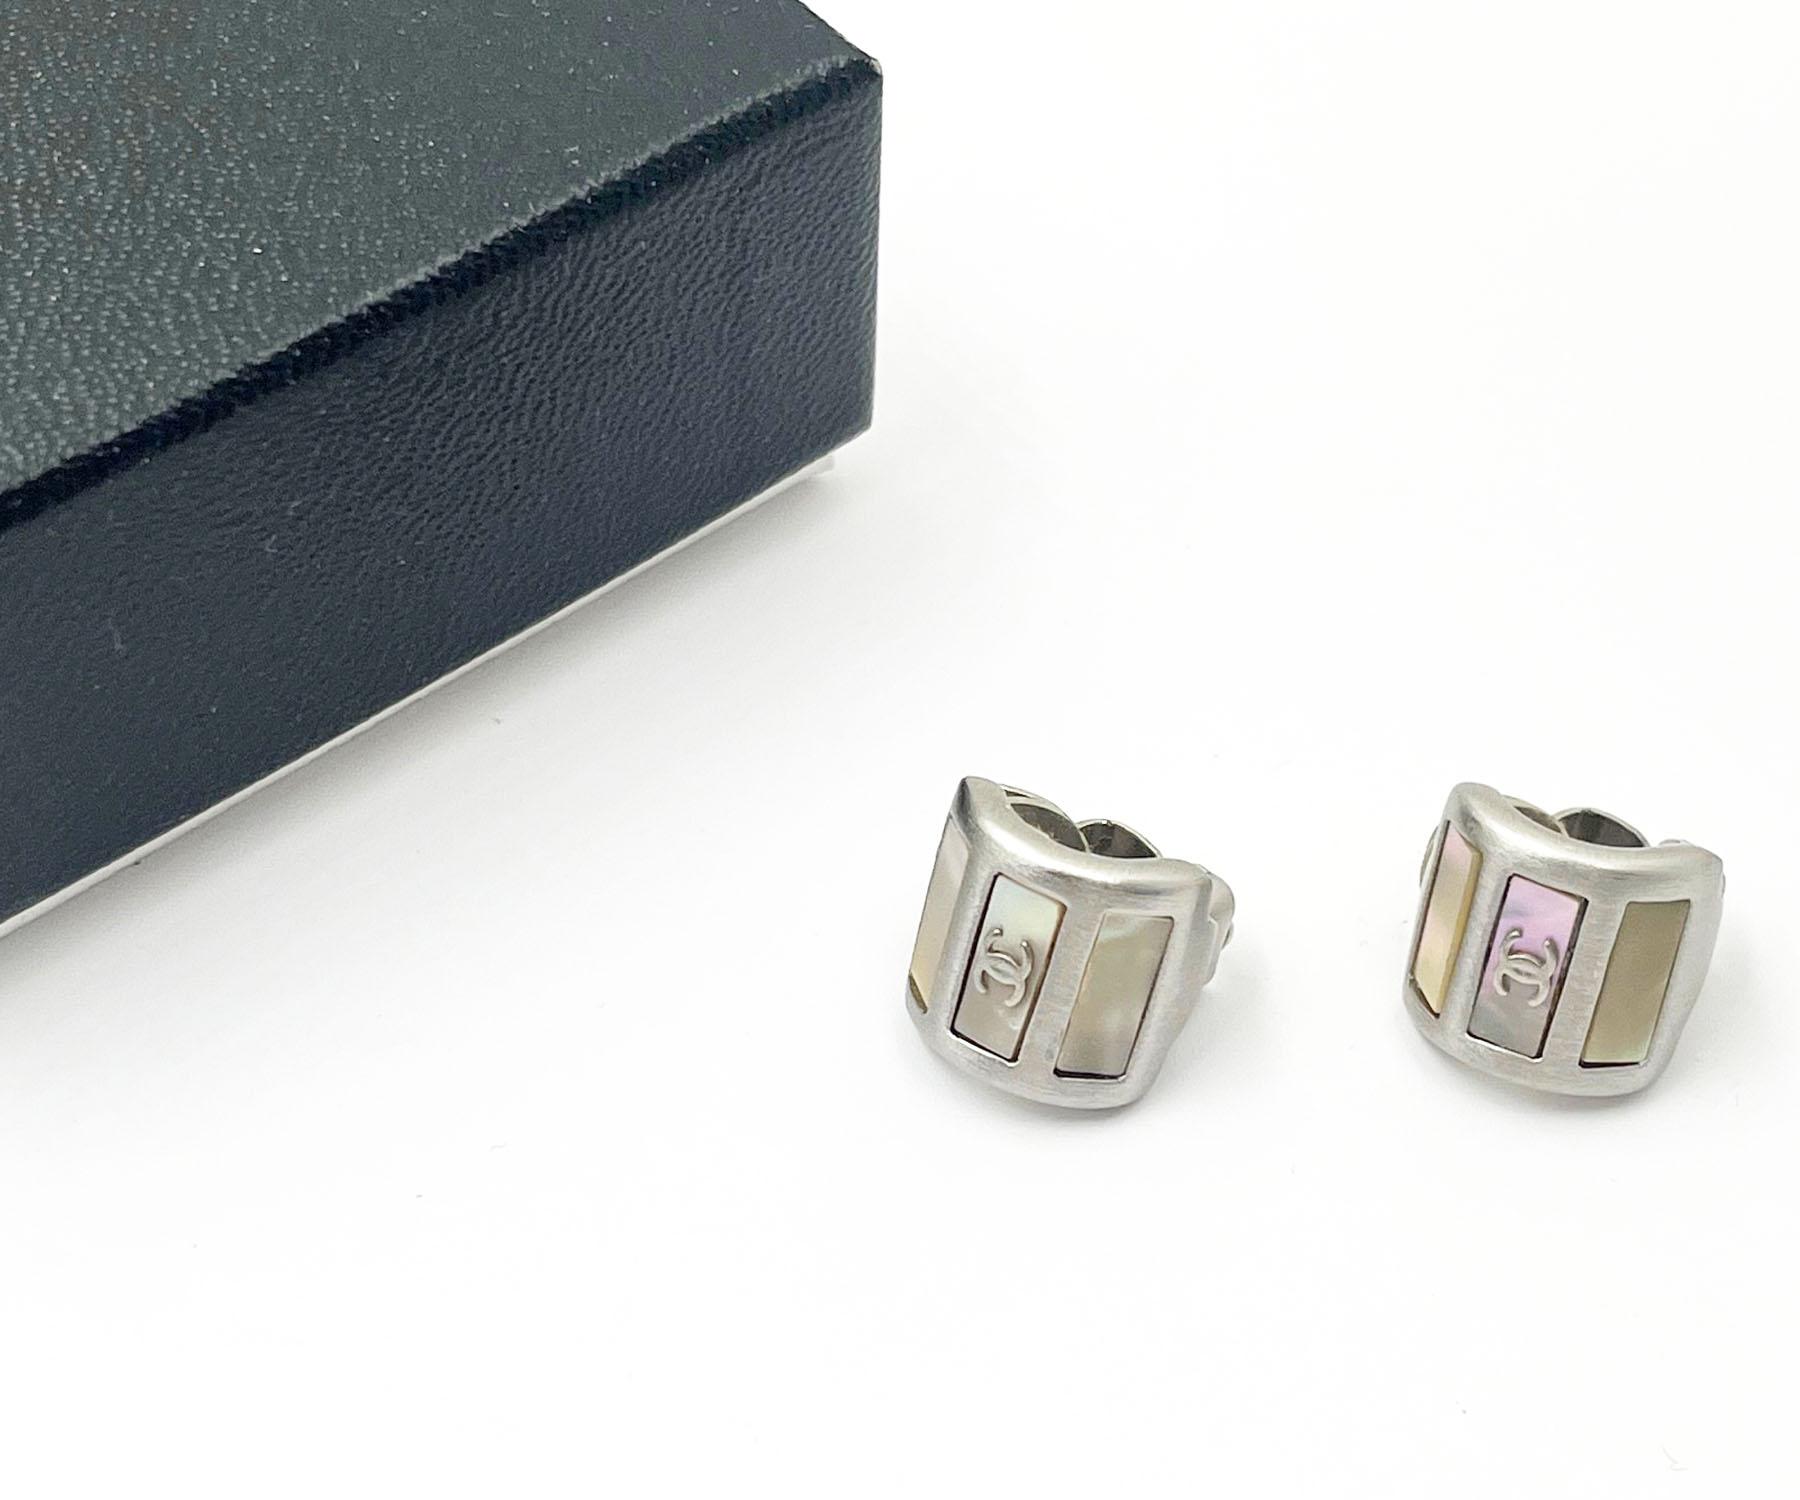 Chanel Classic Vintage Silver CC Baguette Mother of Pearl Clip on Earrings

* Marked 99 
* Made in Italy
* Comes with the original box

-It is approximately 0.5